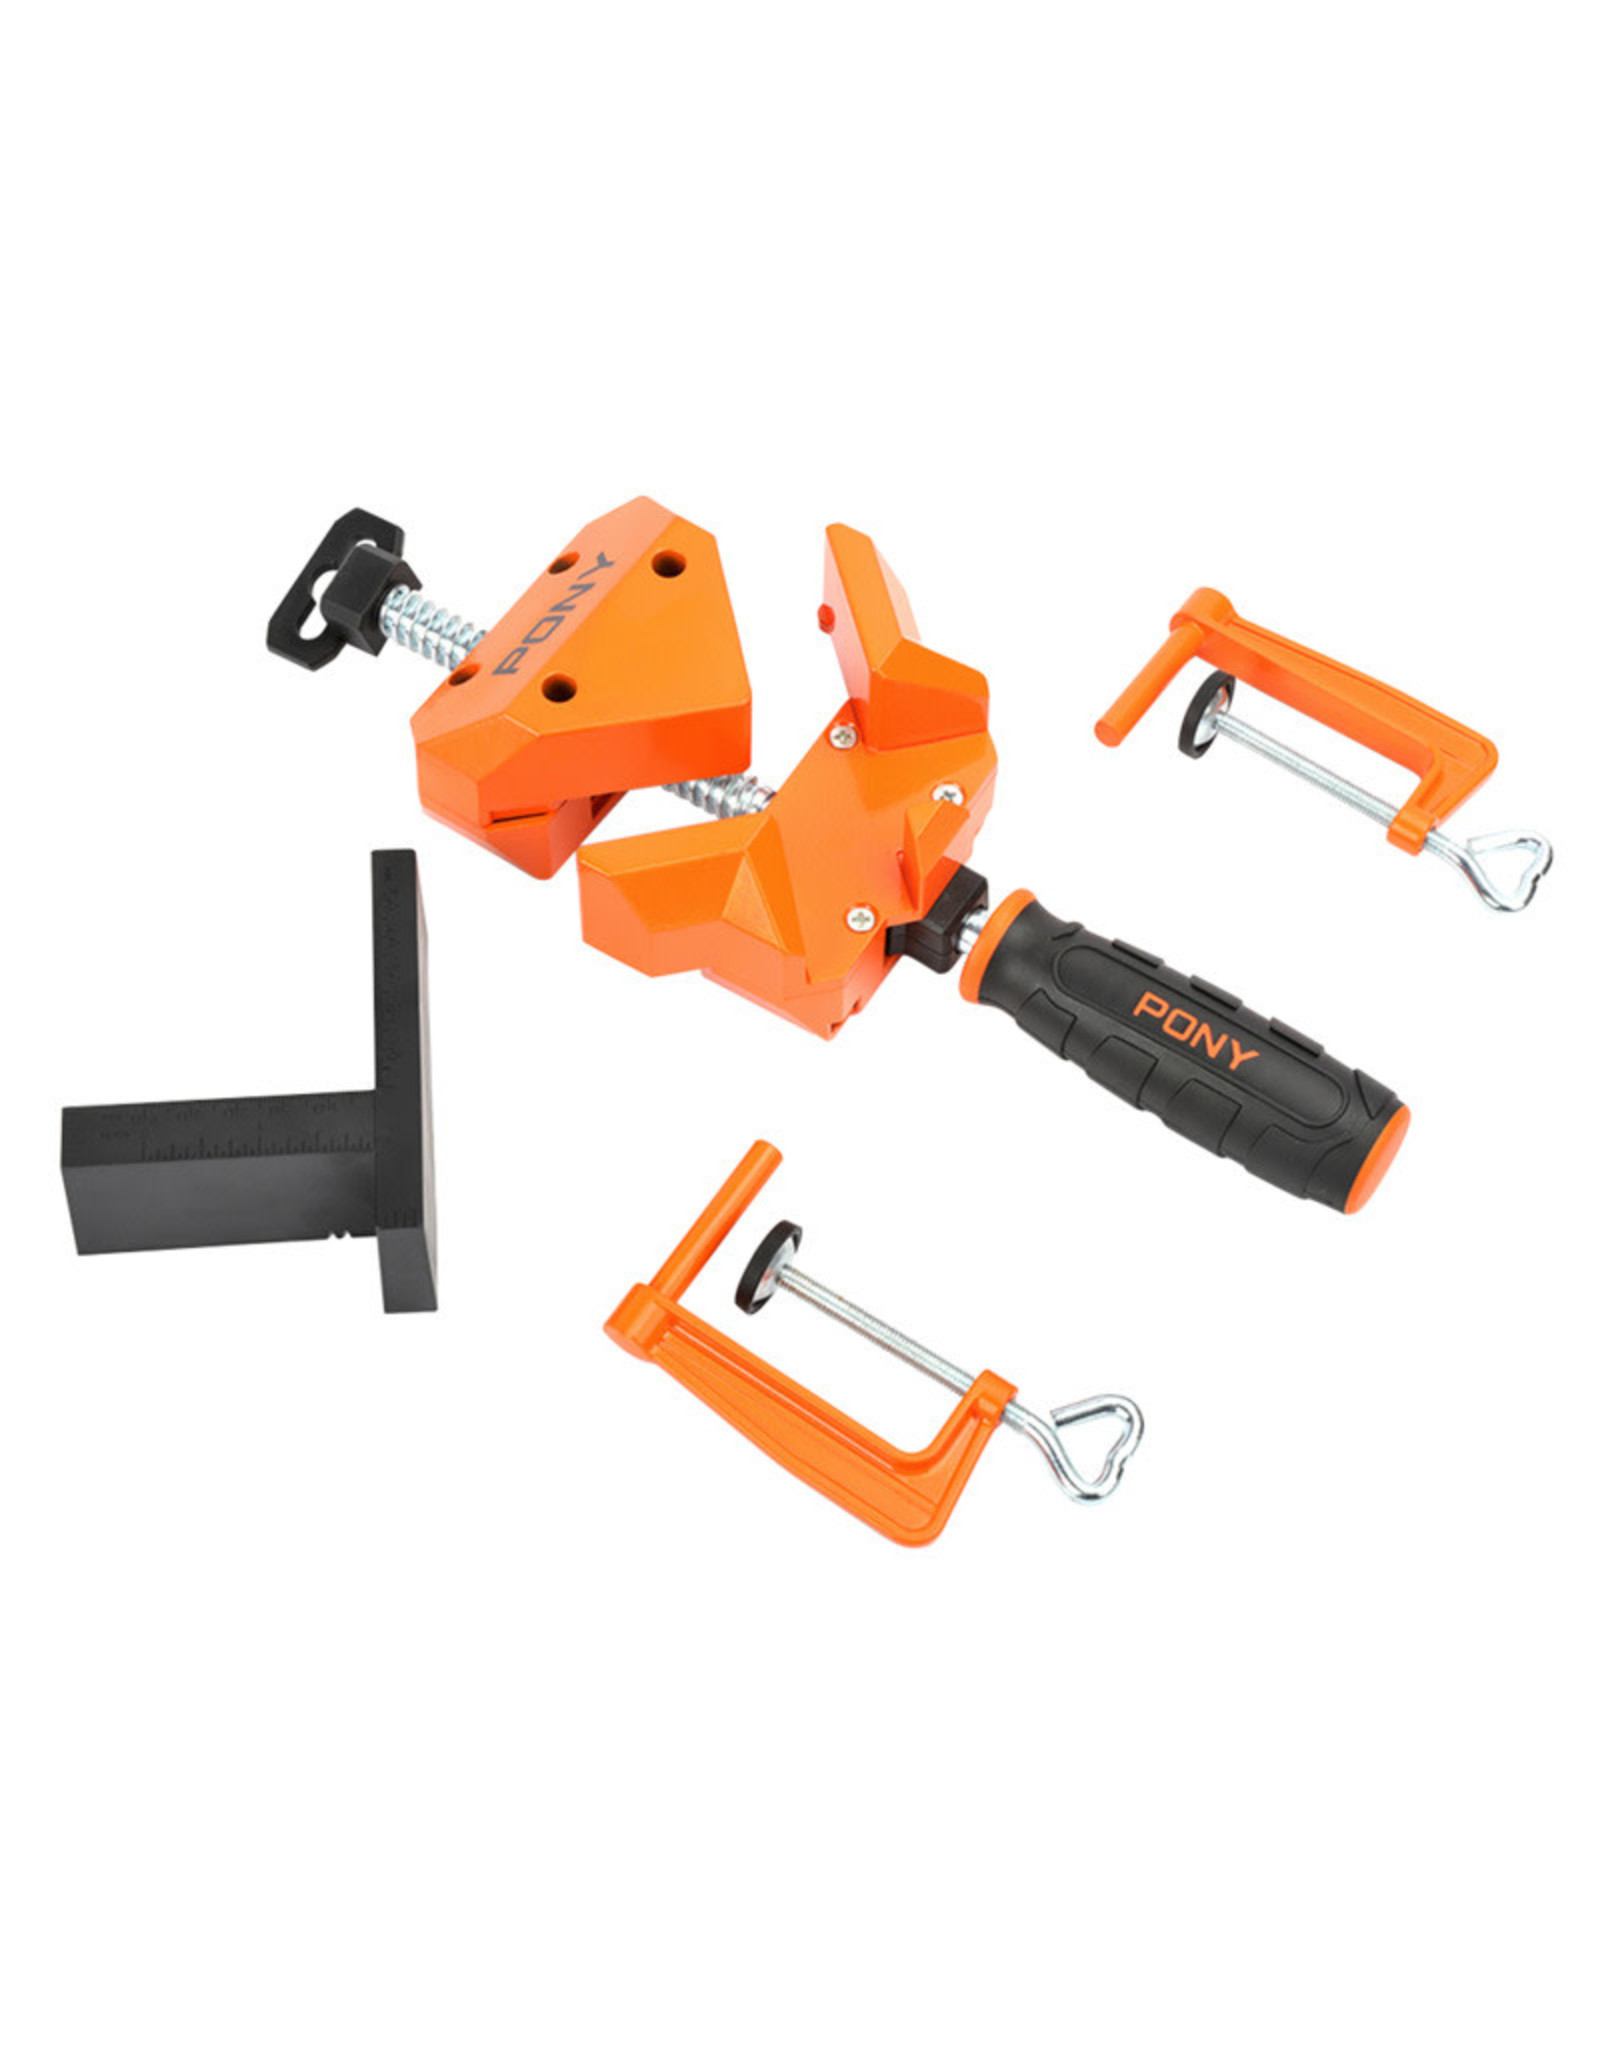 Pony Jorgensen PONY 9180 Angle Clamp, 150 lb Clamping, 1-1/8 in Max Opening Size, 2 in D Throat, Steel Body, Orange Body